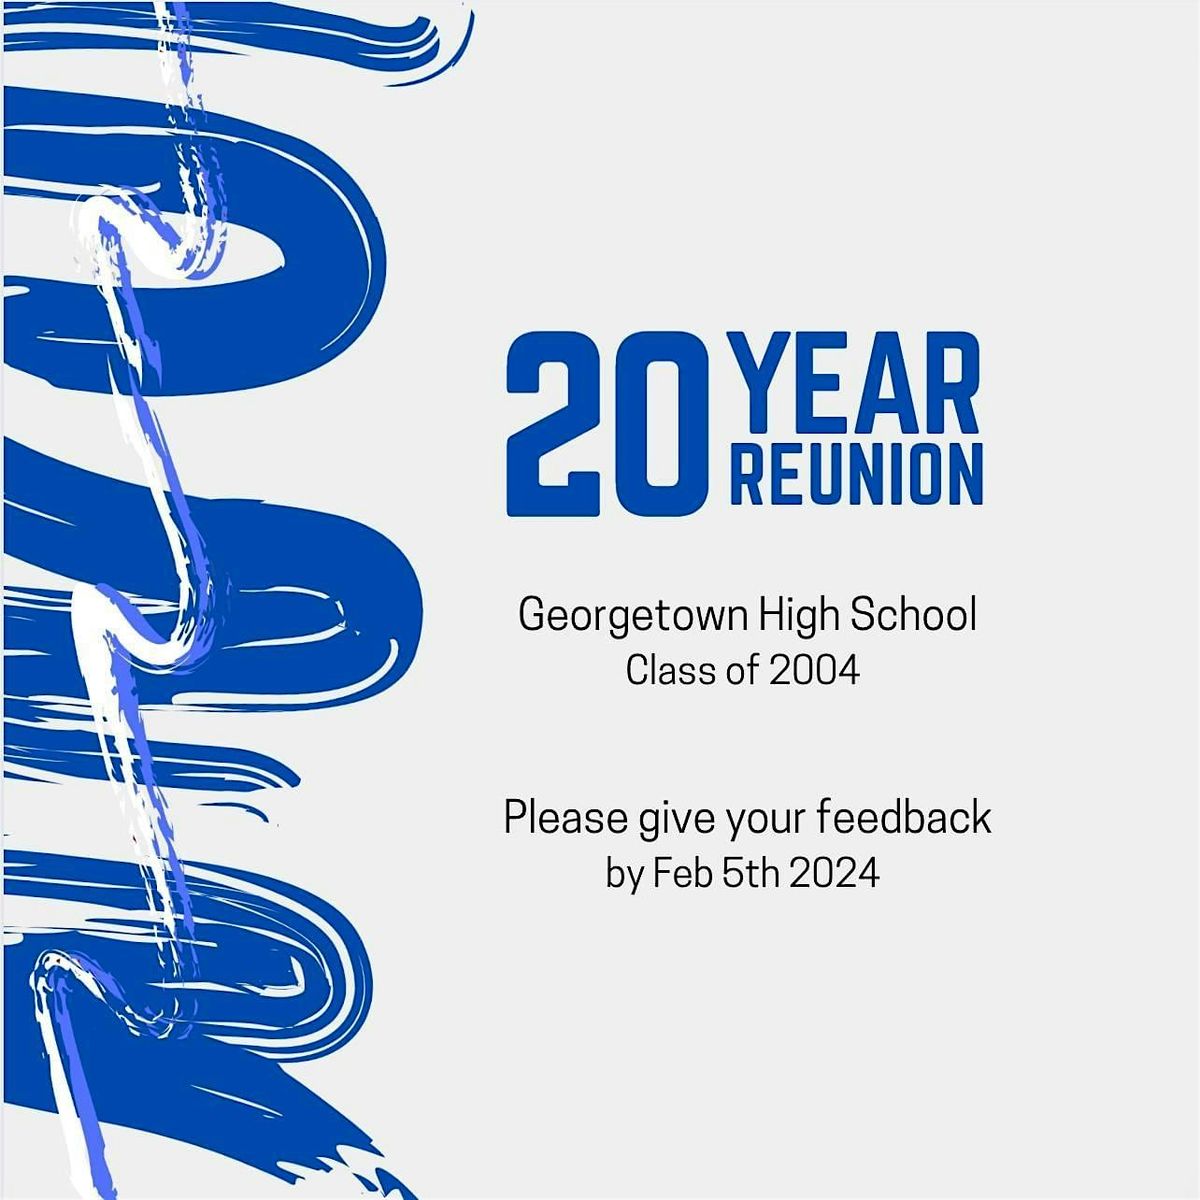 GHS Class of 2004  20 Year Reunion